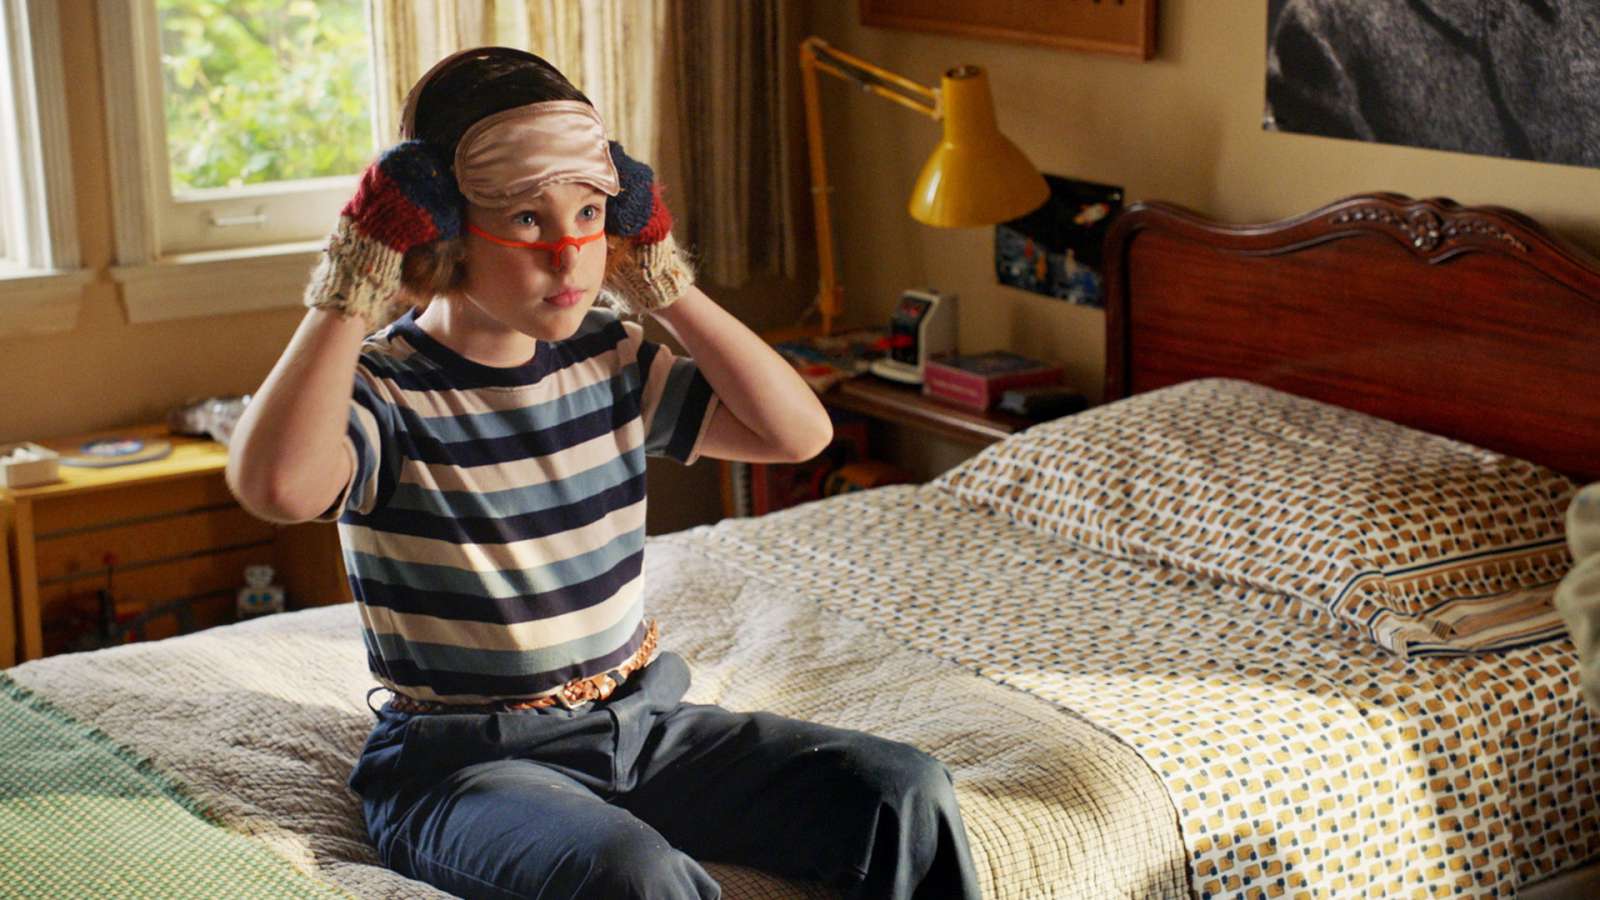 Young Sheldon : Contracts, Rules and a Little Bit of Pig Brains